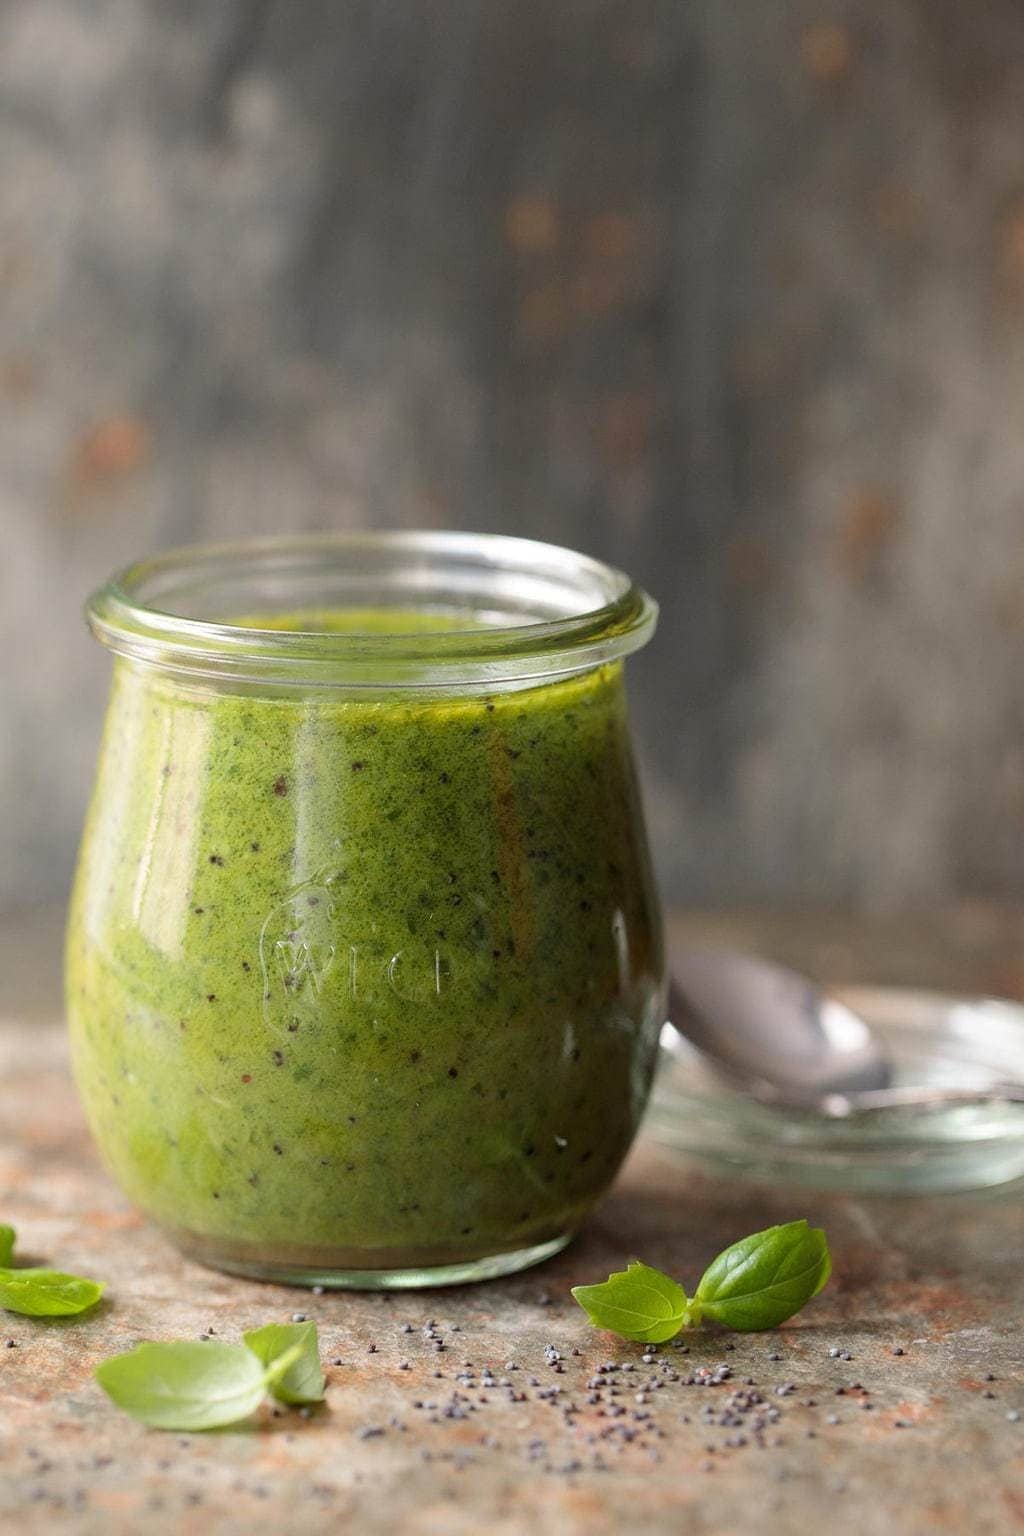 Photo of a glass Weck jar filled with Lemon Basil Poppyseed Dressing.